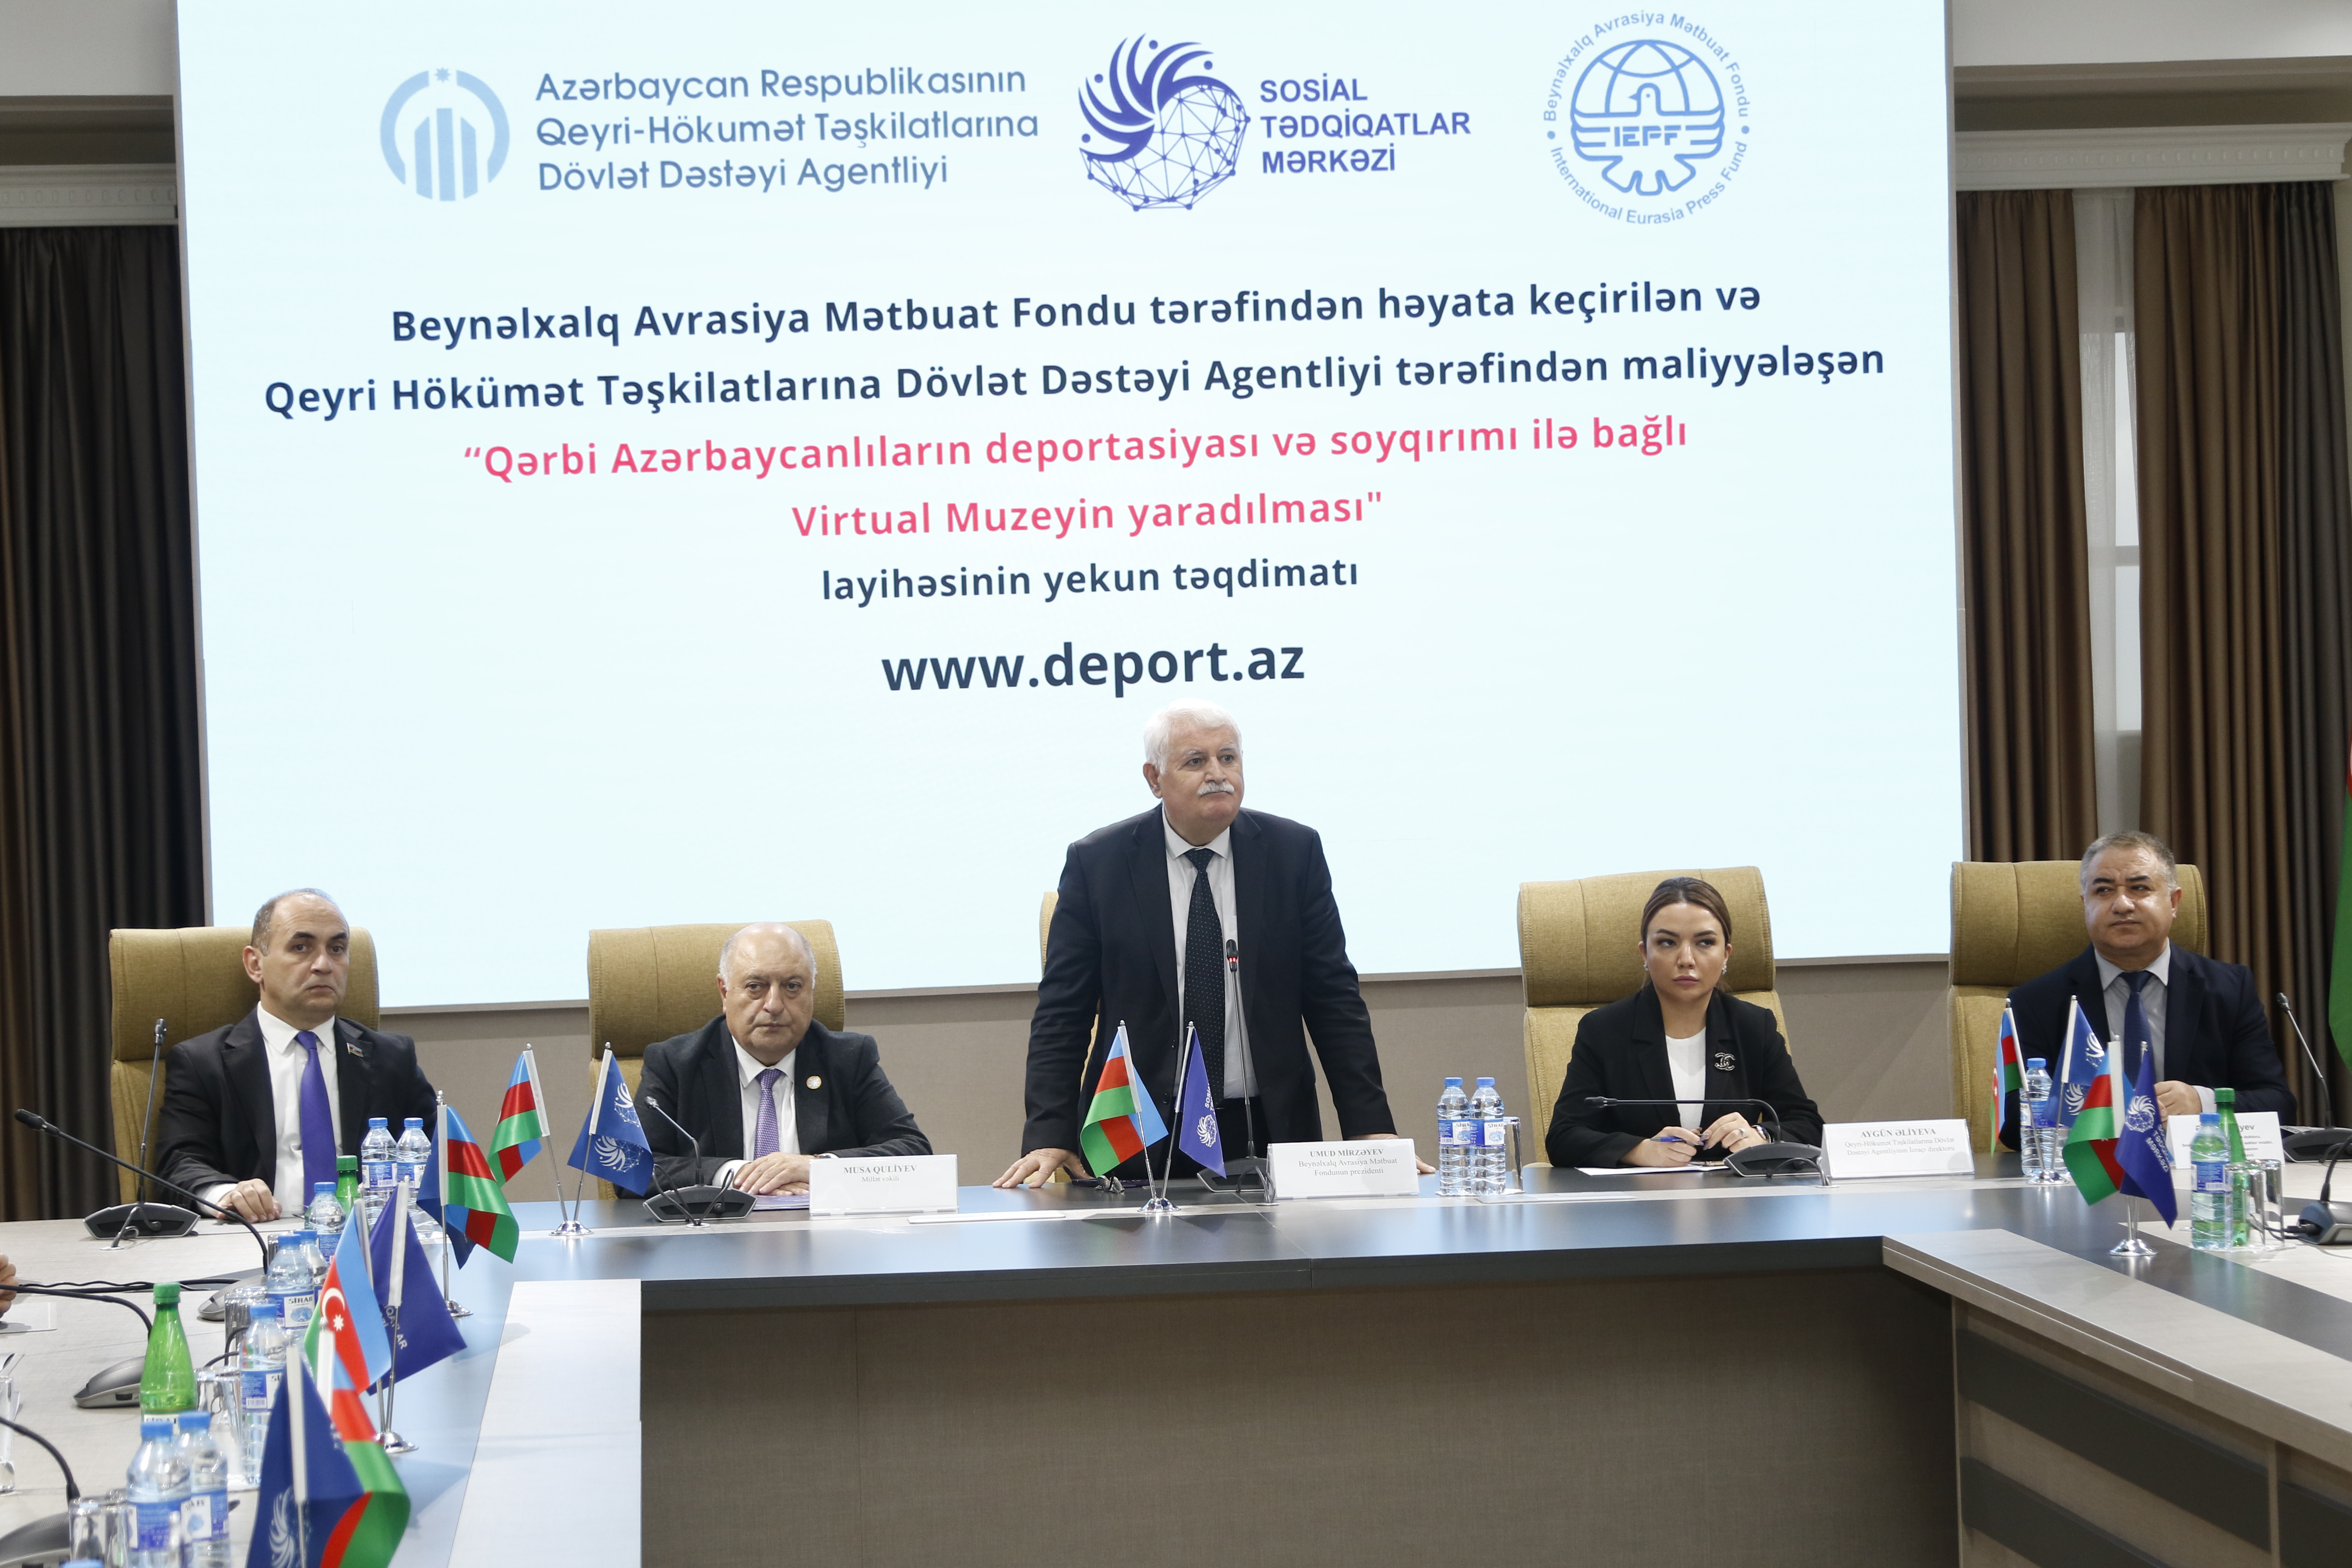 The final presentation event of the project "Creating a virtual museum related to the deportation and genocide of "Western Azerbaijanis" is being held – PHOTOS